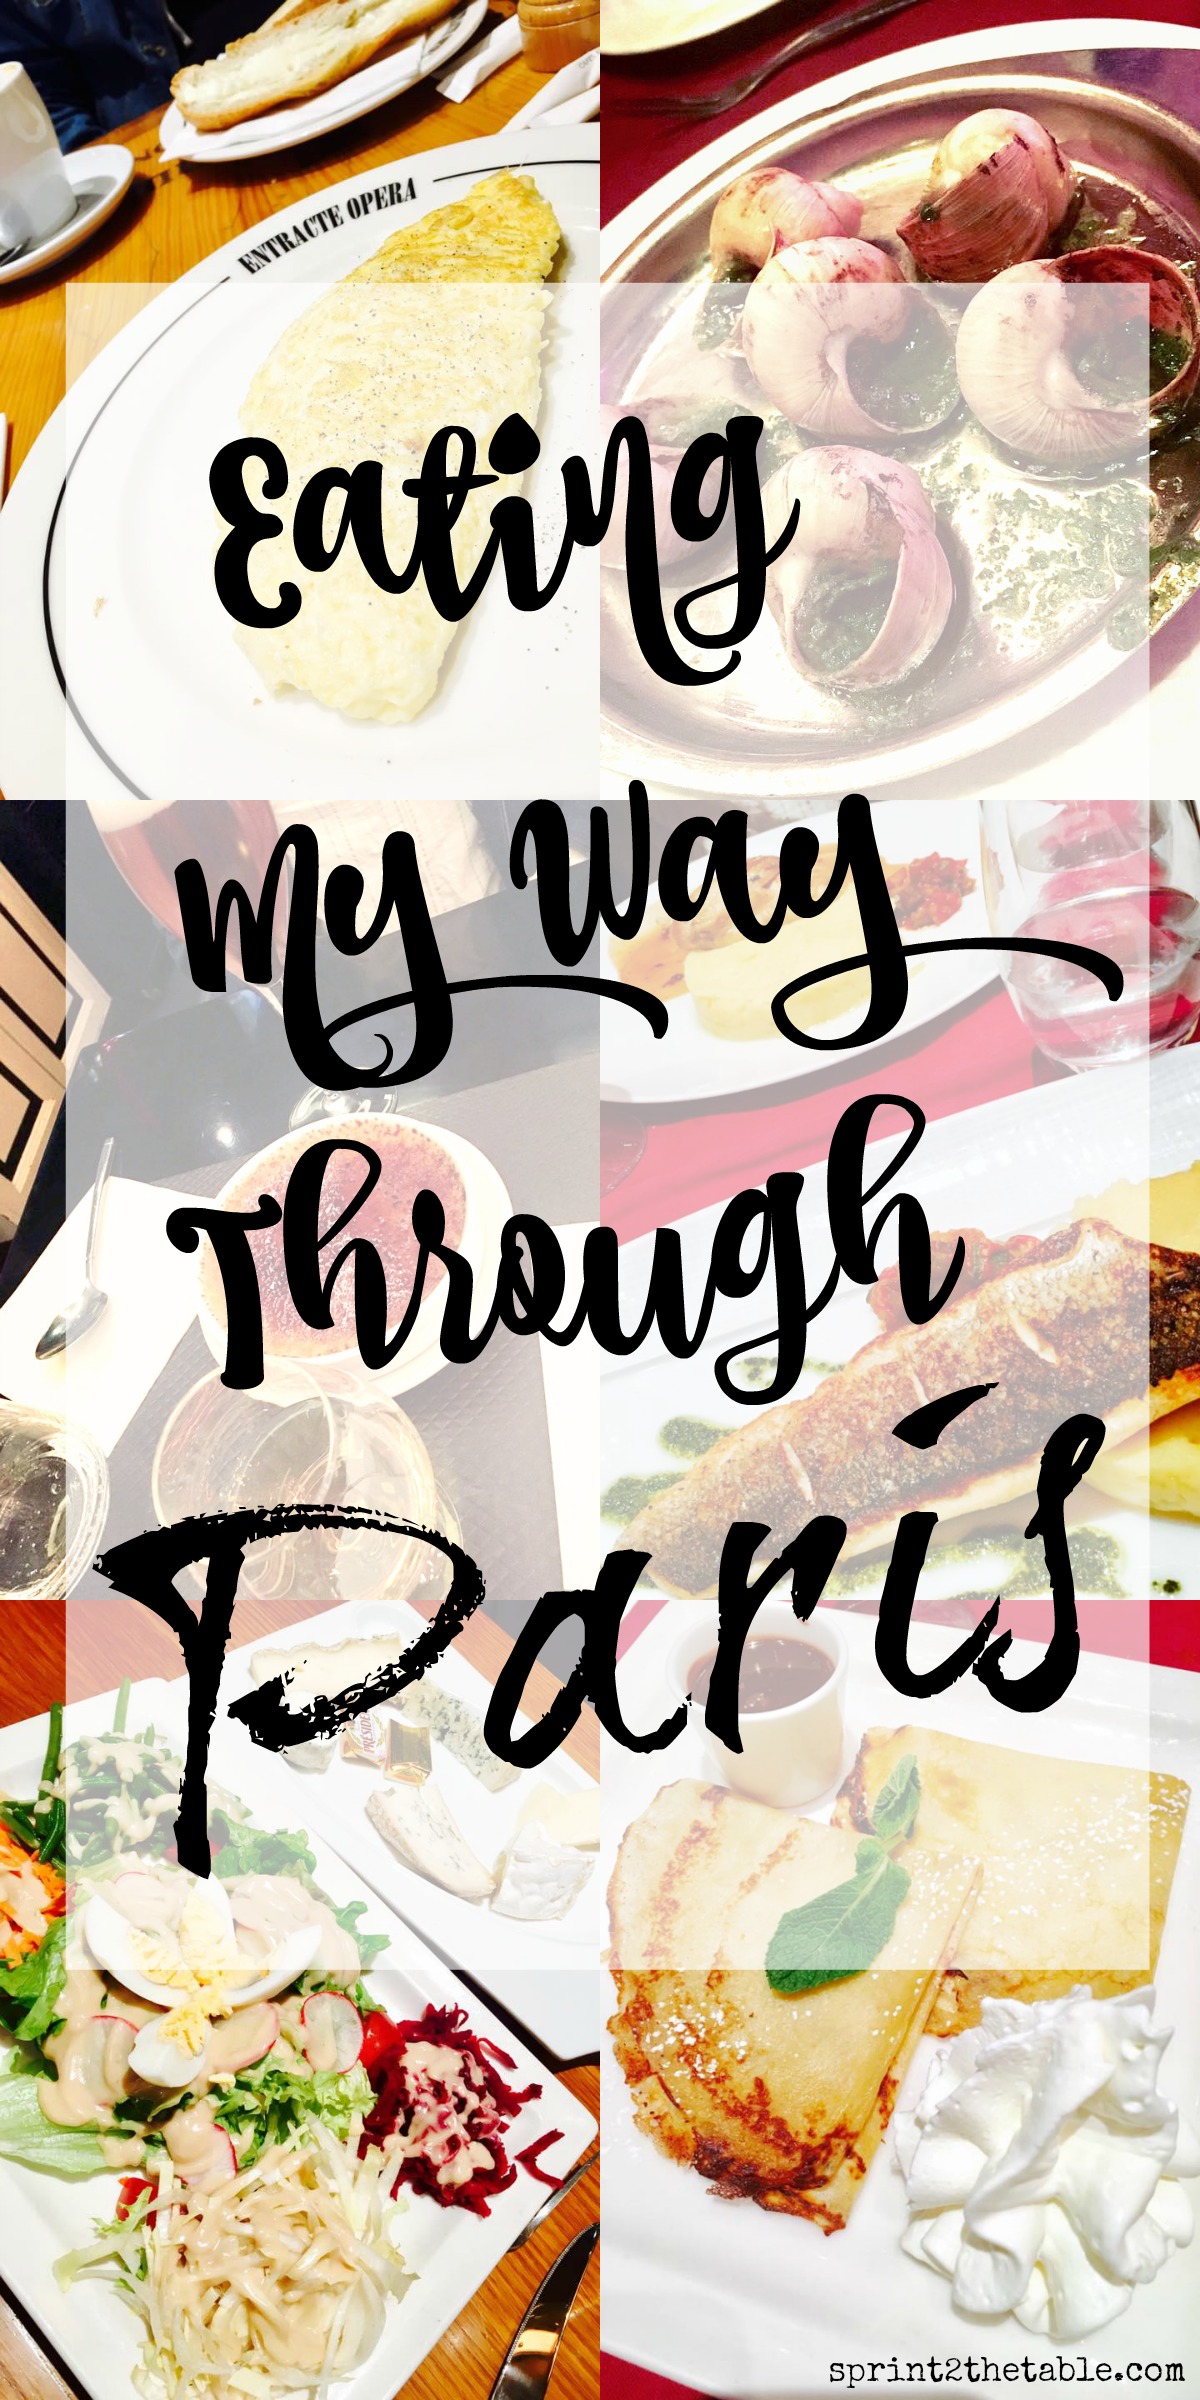 Some people vacation to see historical sites. Some people go for the beach. Me? I travel for food and wine! That's exactly how we saw France. Here's how to eat your way through a day in France.